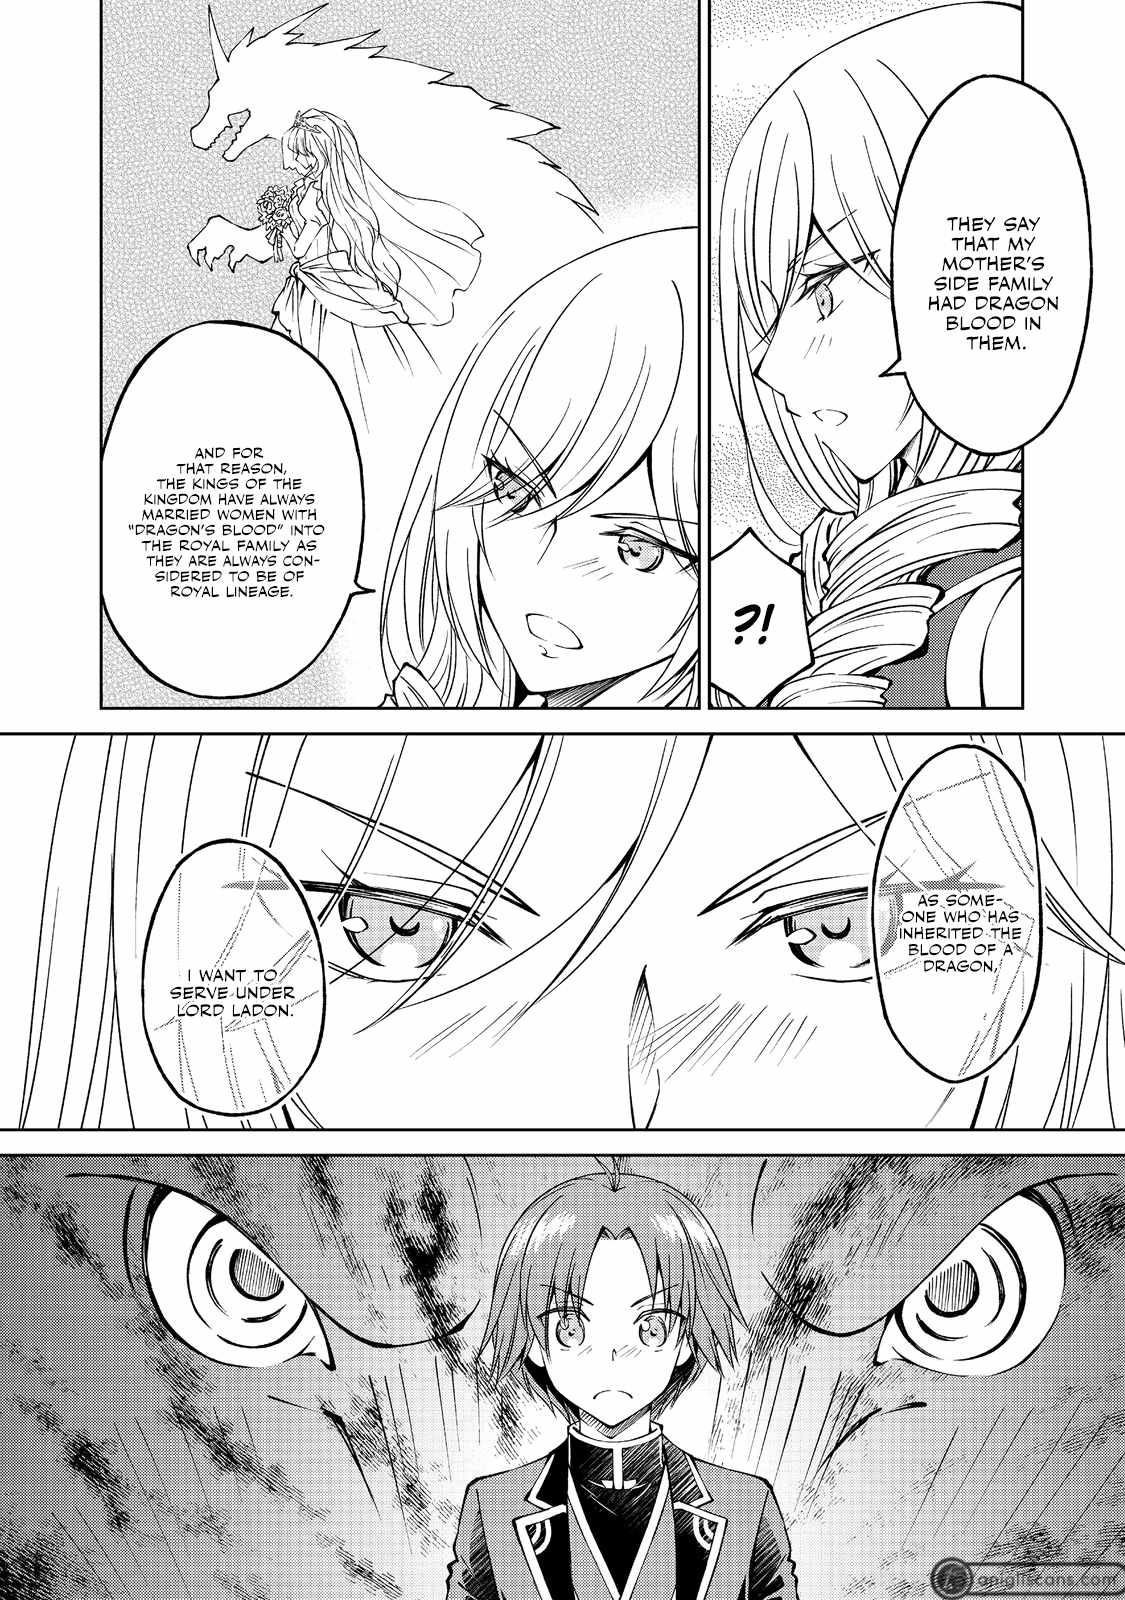 My Noble Family is Headed For Ruin, So I May As Well Study Magic In My Free Time Chapter 12-eng-li - Page 4